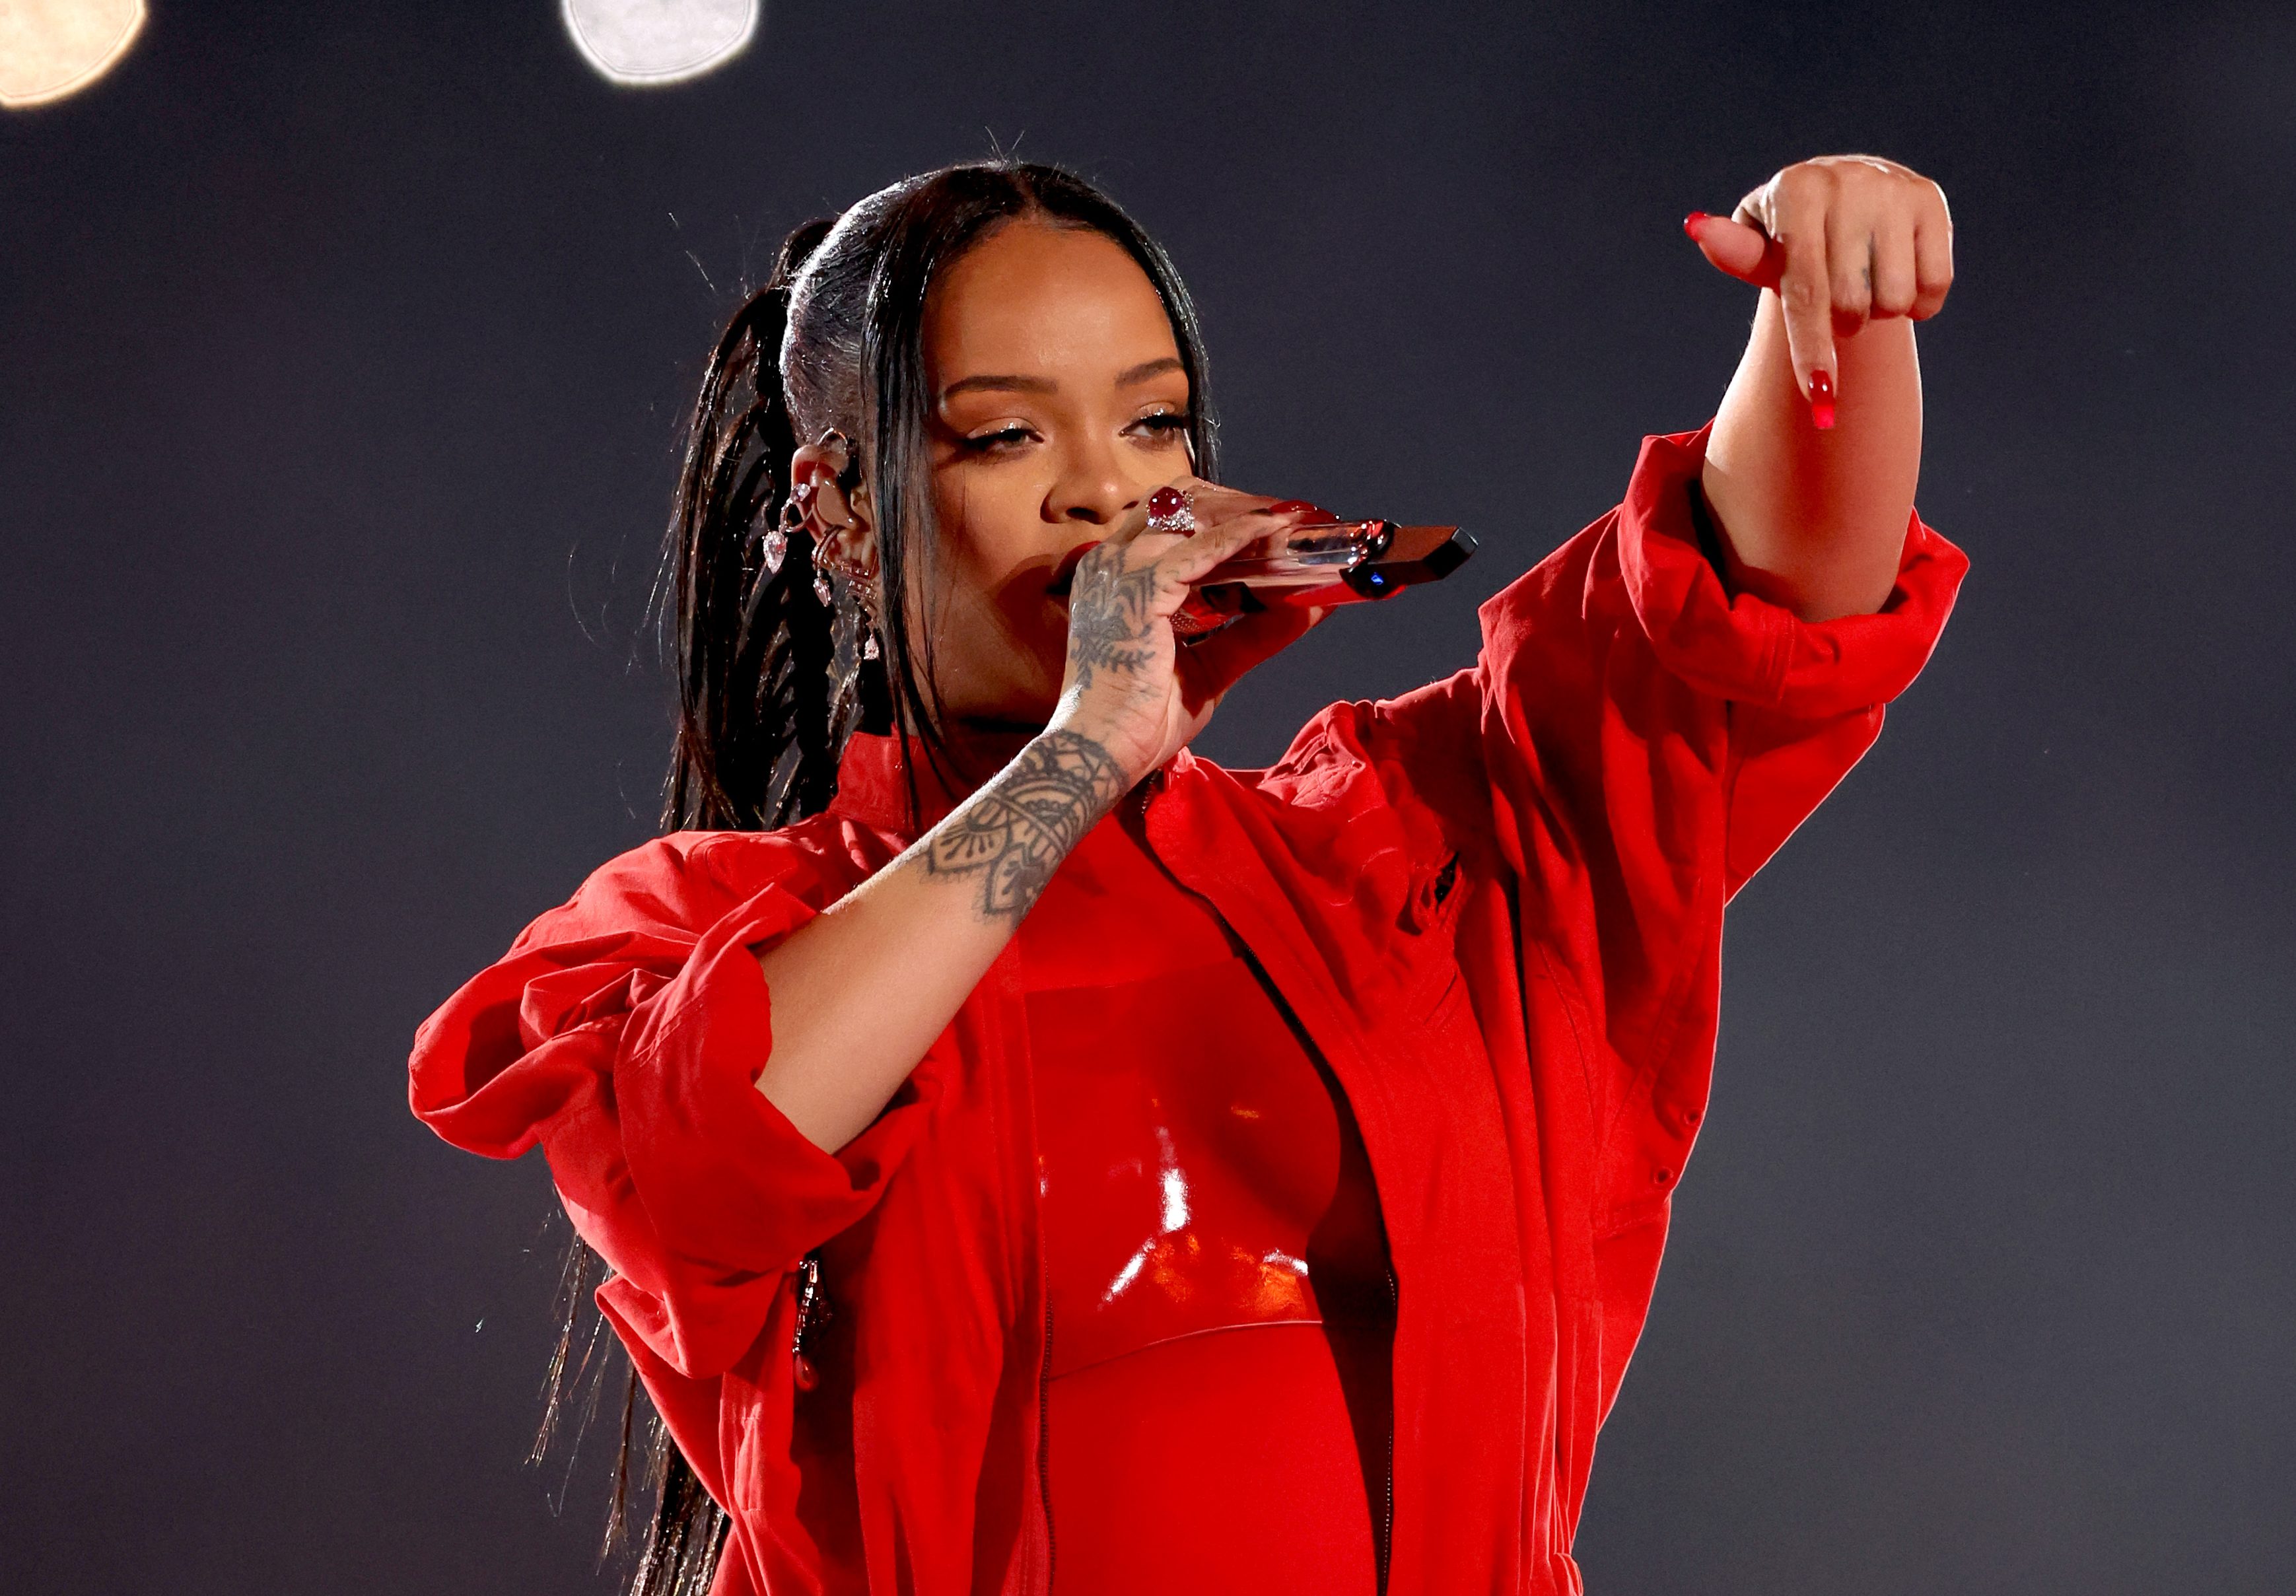 Rihanna is criticized for doing "the worst lipsyncing ever" at Super